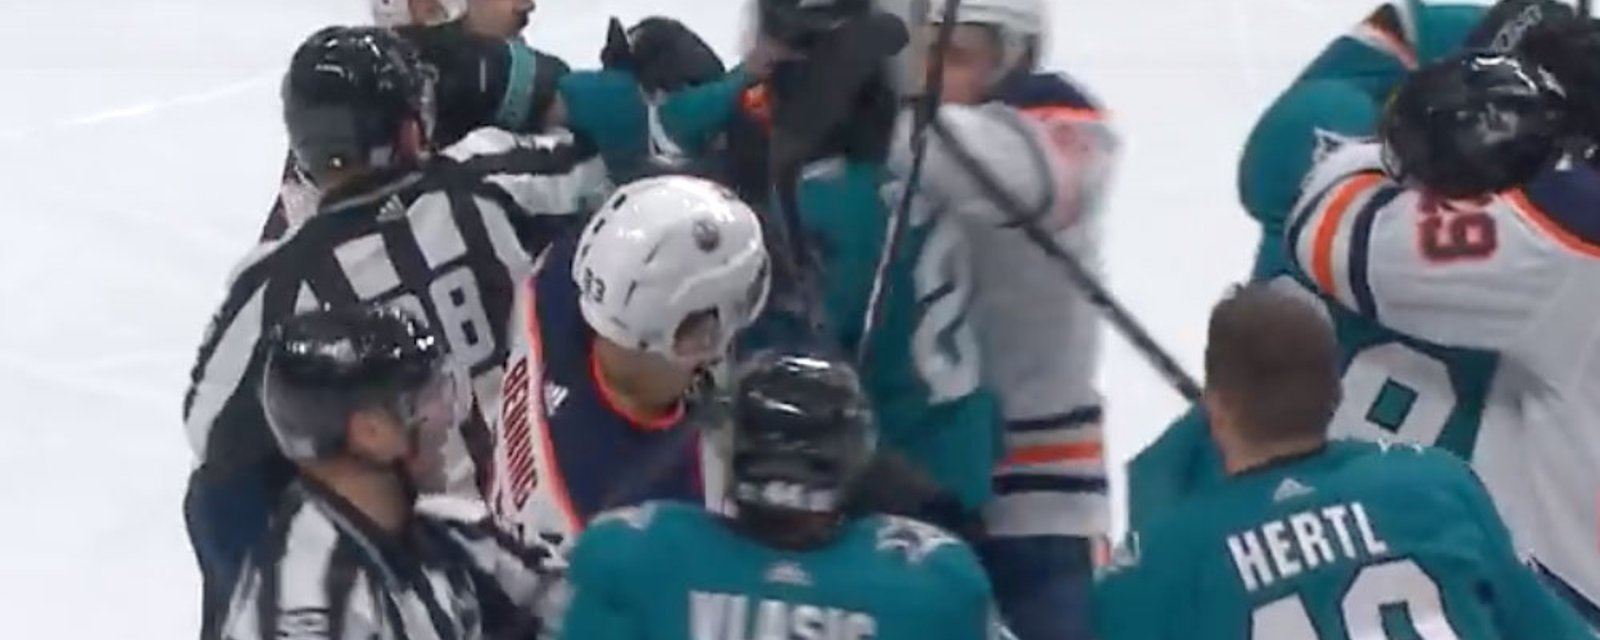 Huge brawl ensues after Connor McDavid gets dropped in neutral zone!